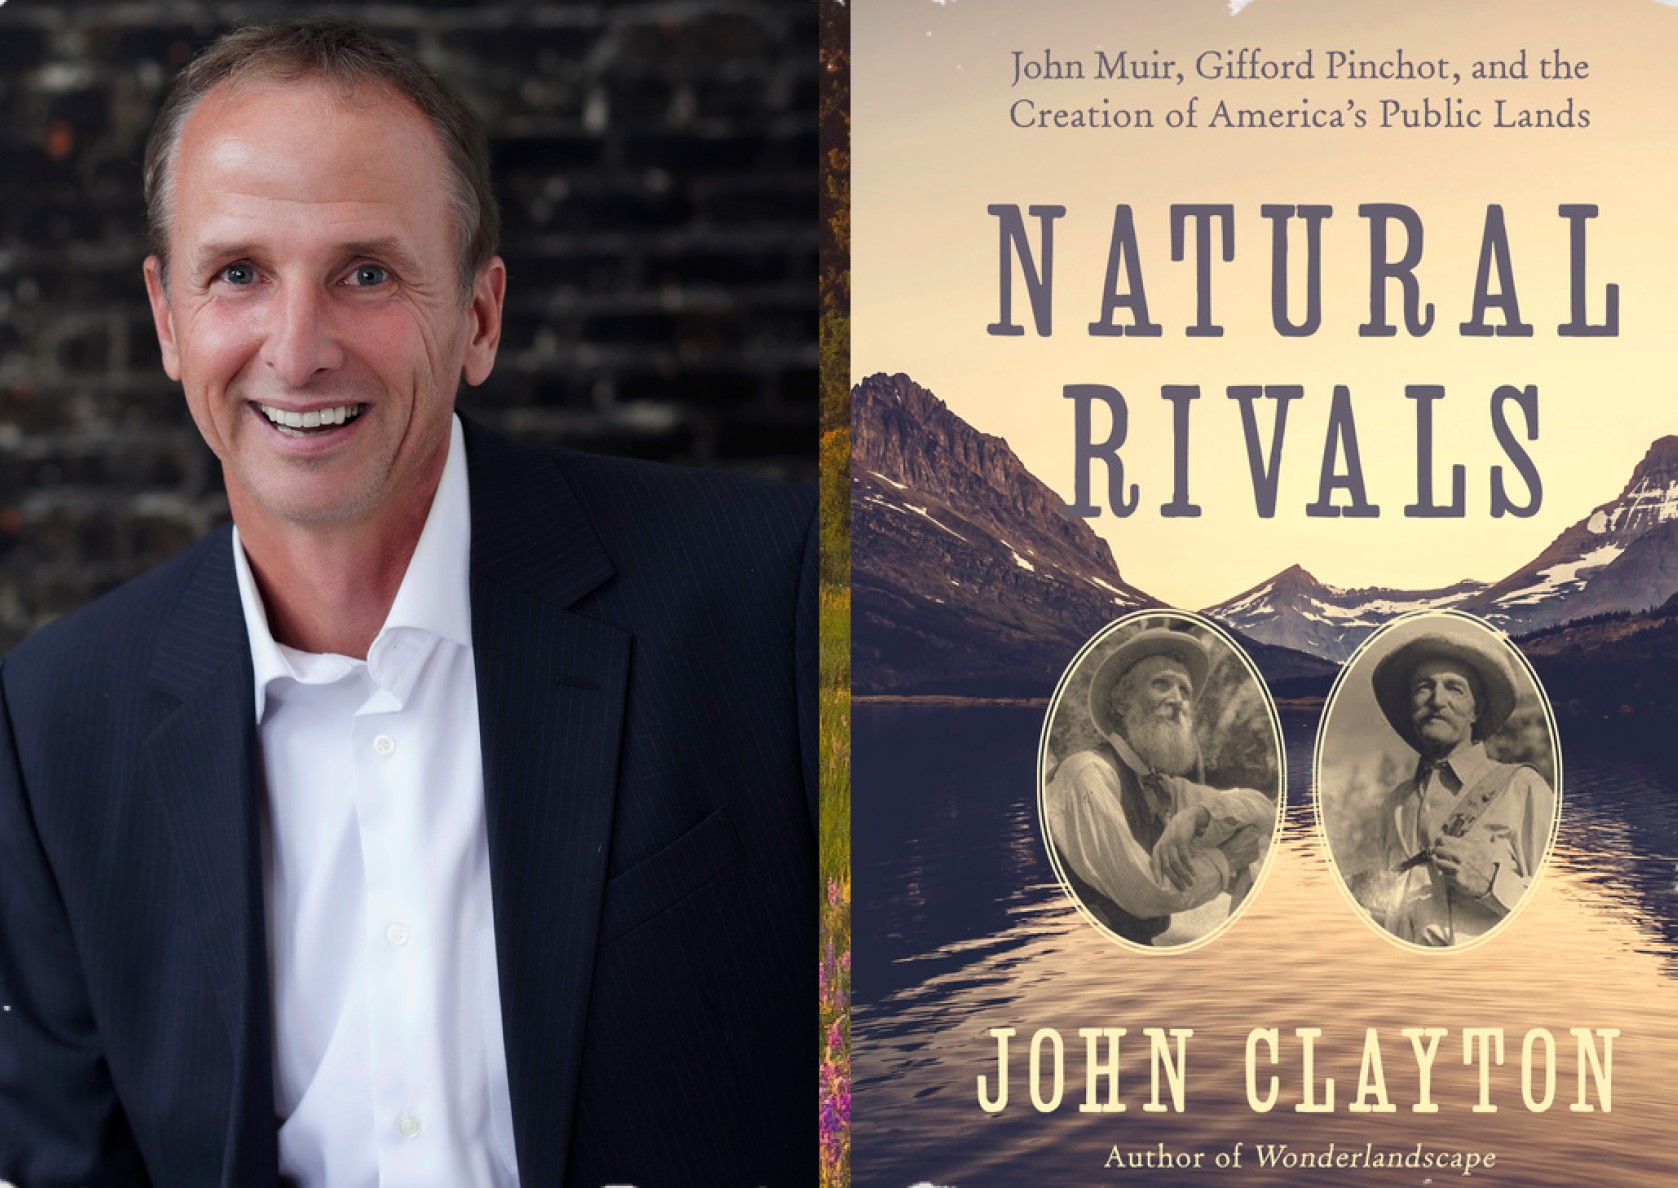 Photo of author John Clayton and Natural Rivals book cover